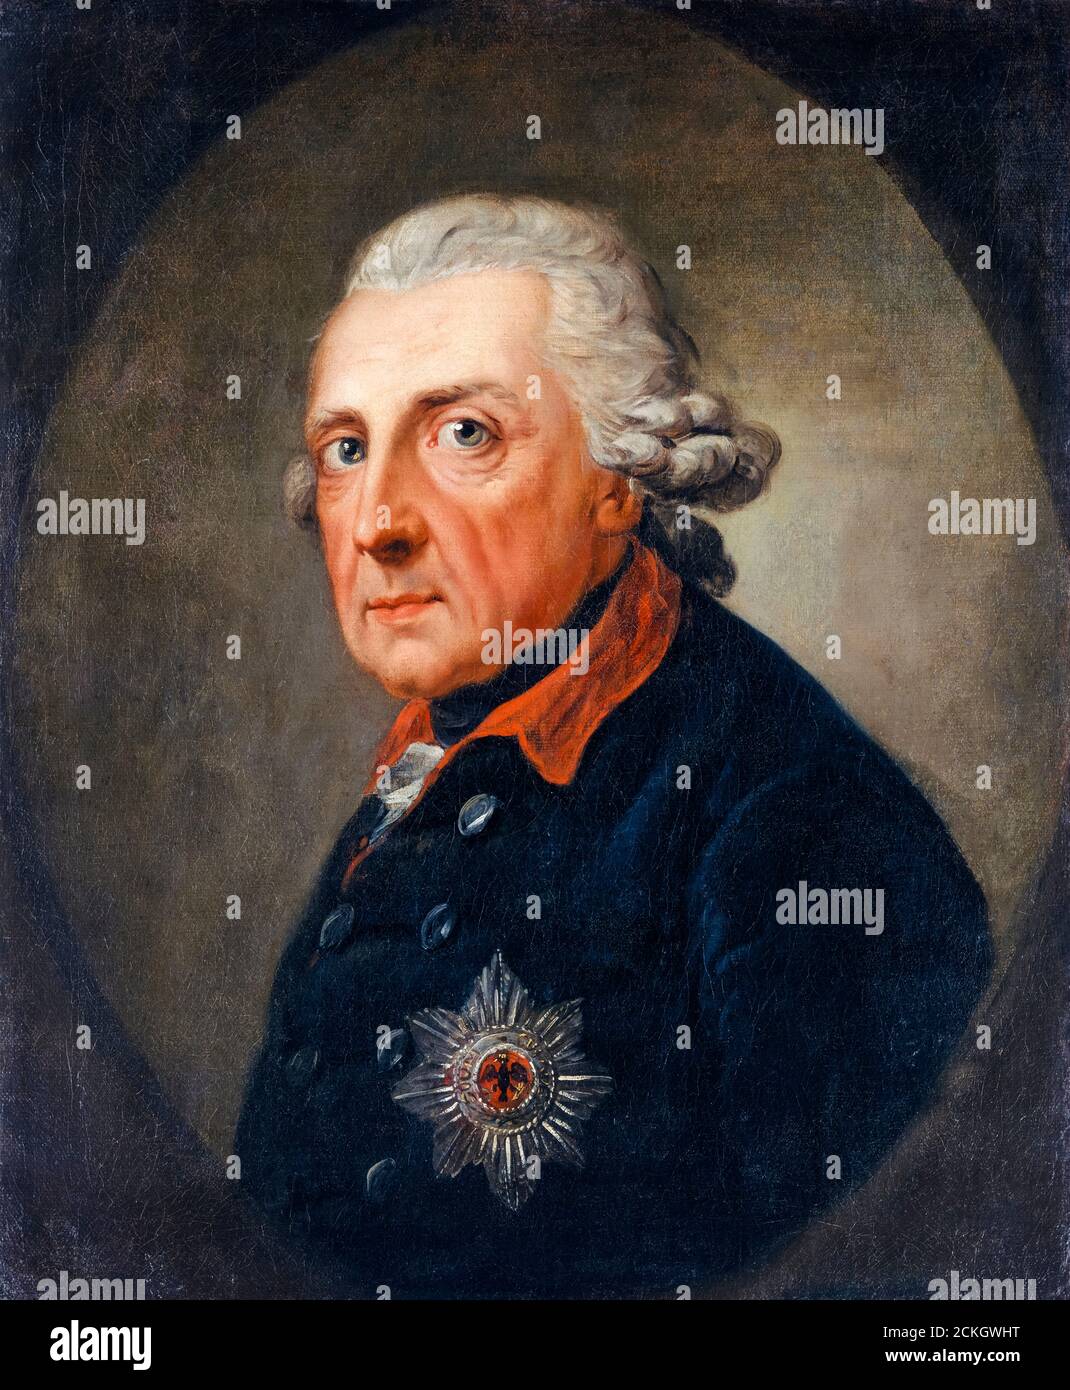 Frederick II (1712-1786) aka Frederick the Great, King of Prussia, portrait painting by Anton Graff, 1781-1786 Stock Photo